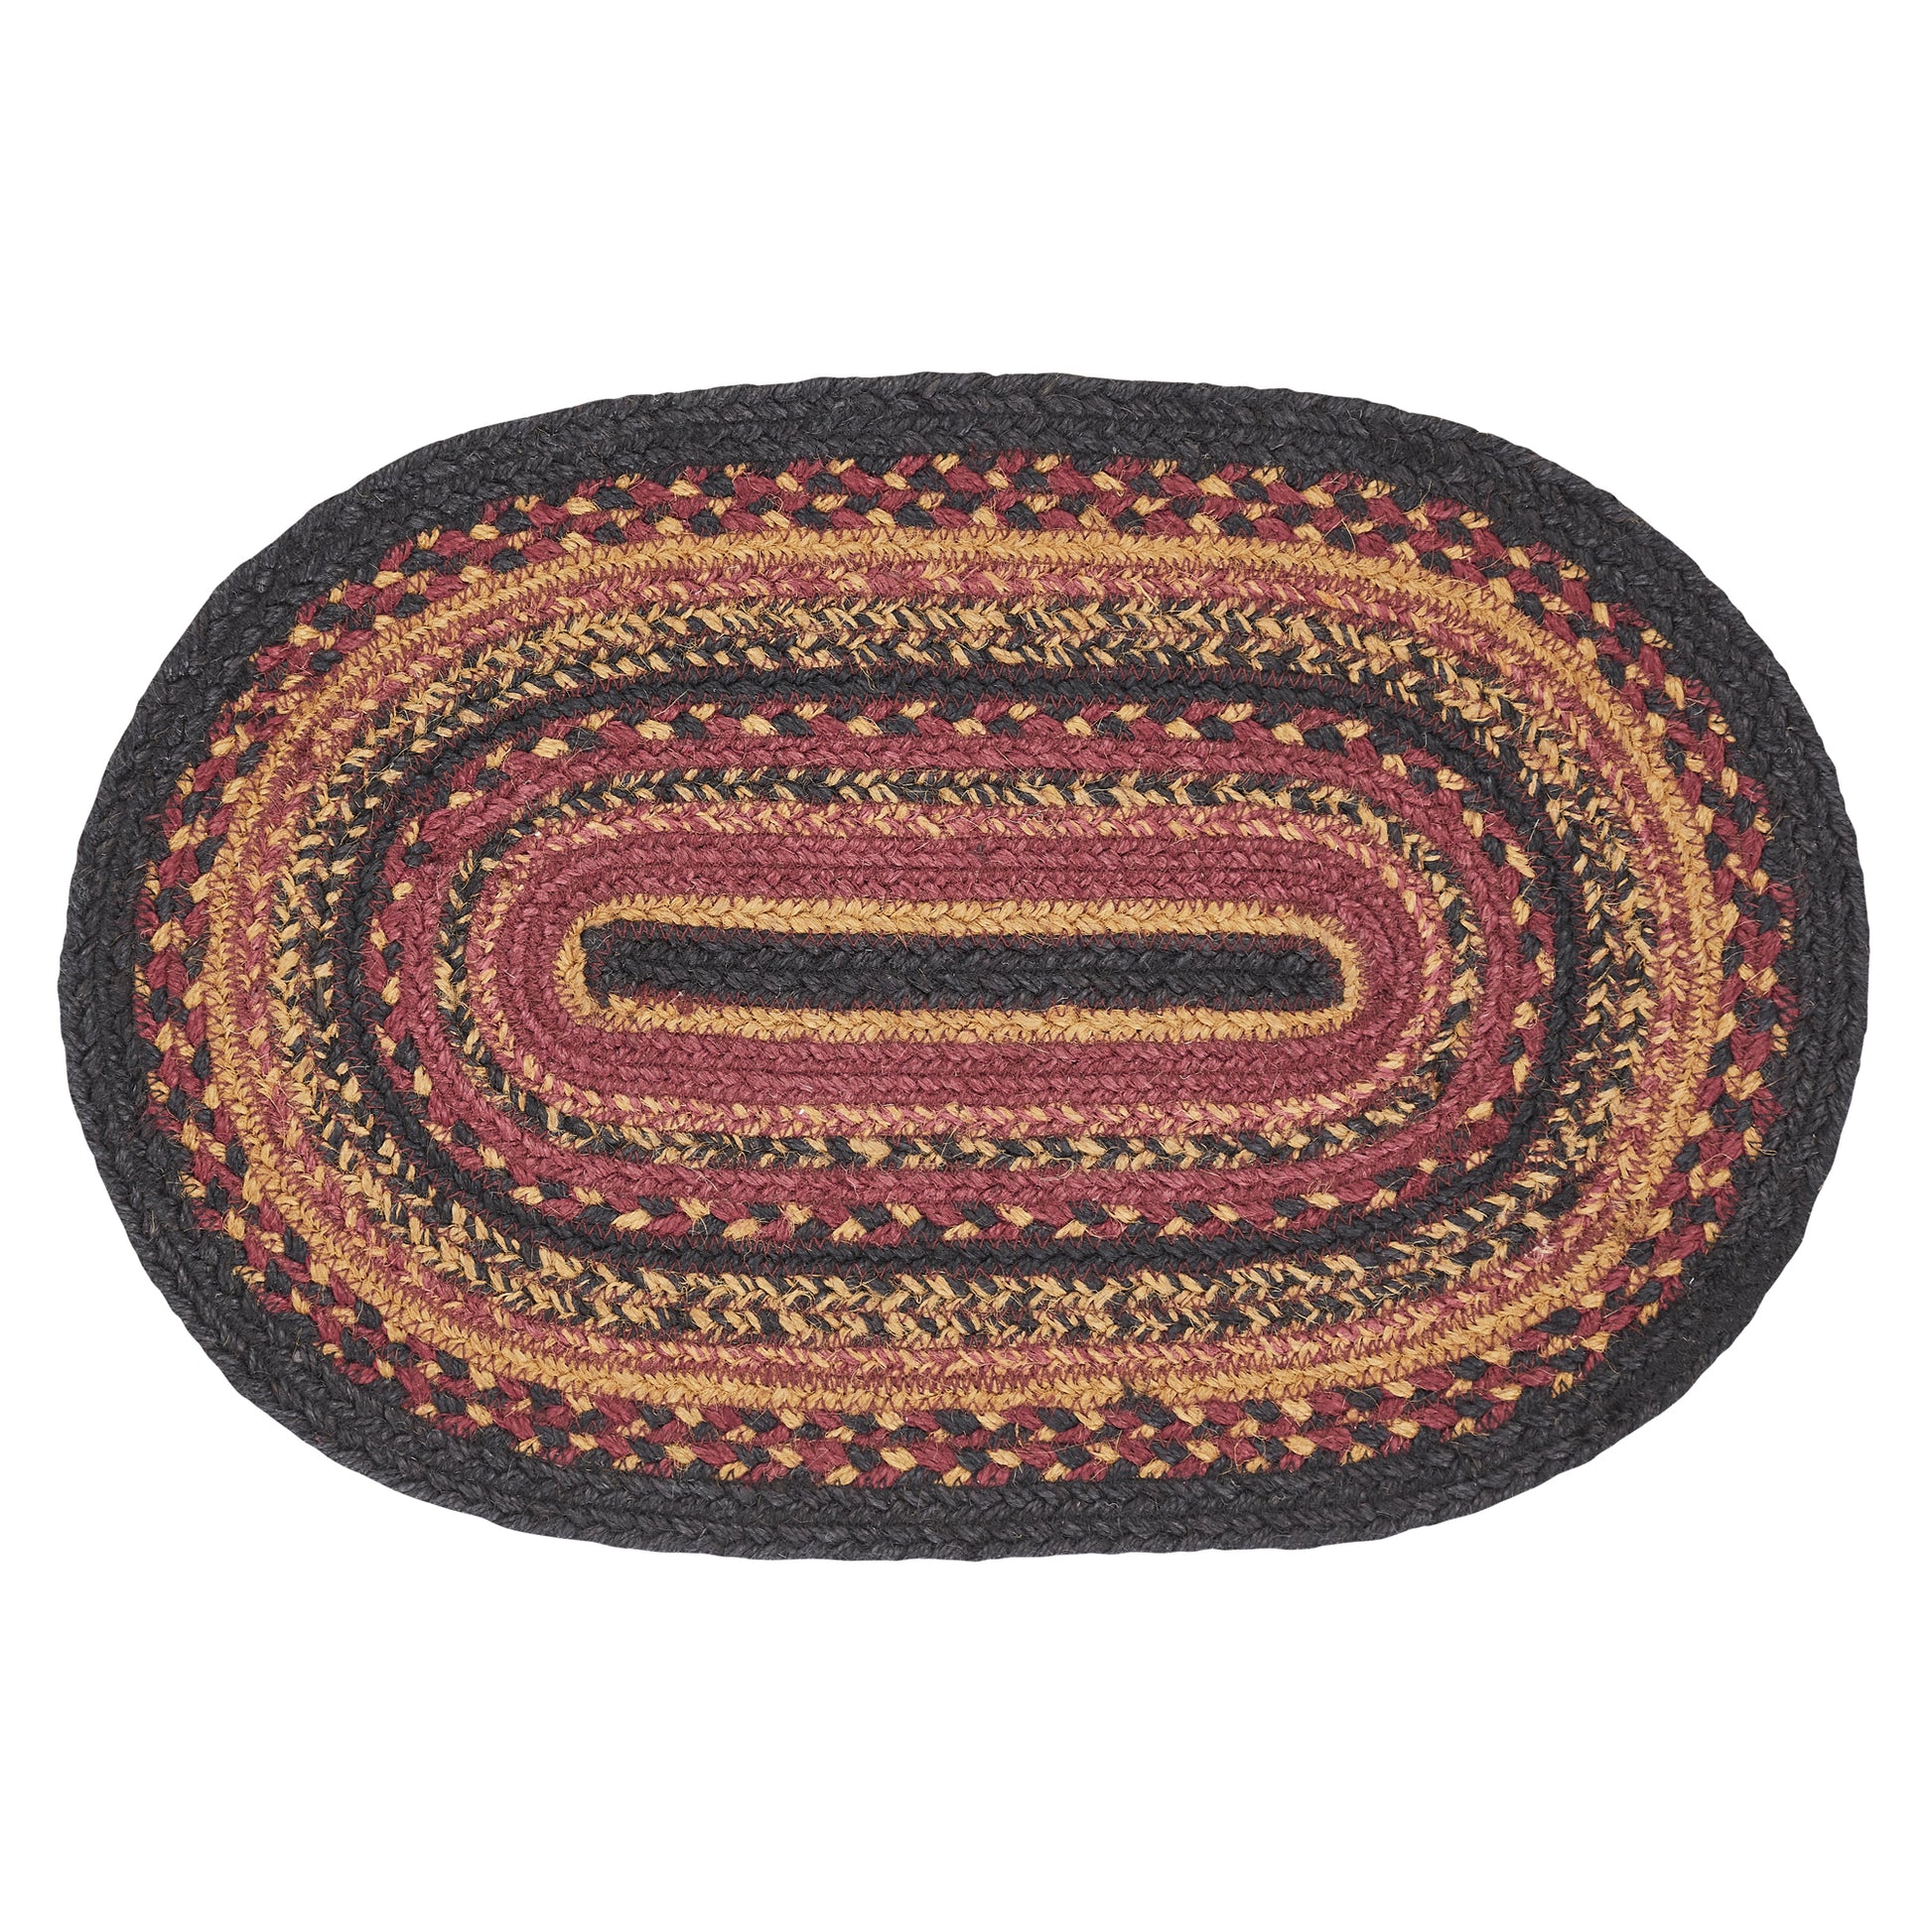 81363-Heritage-Farms-Jute-Oval-Placemat-12x18-image-4